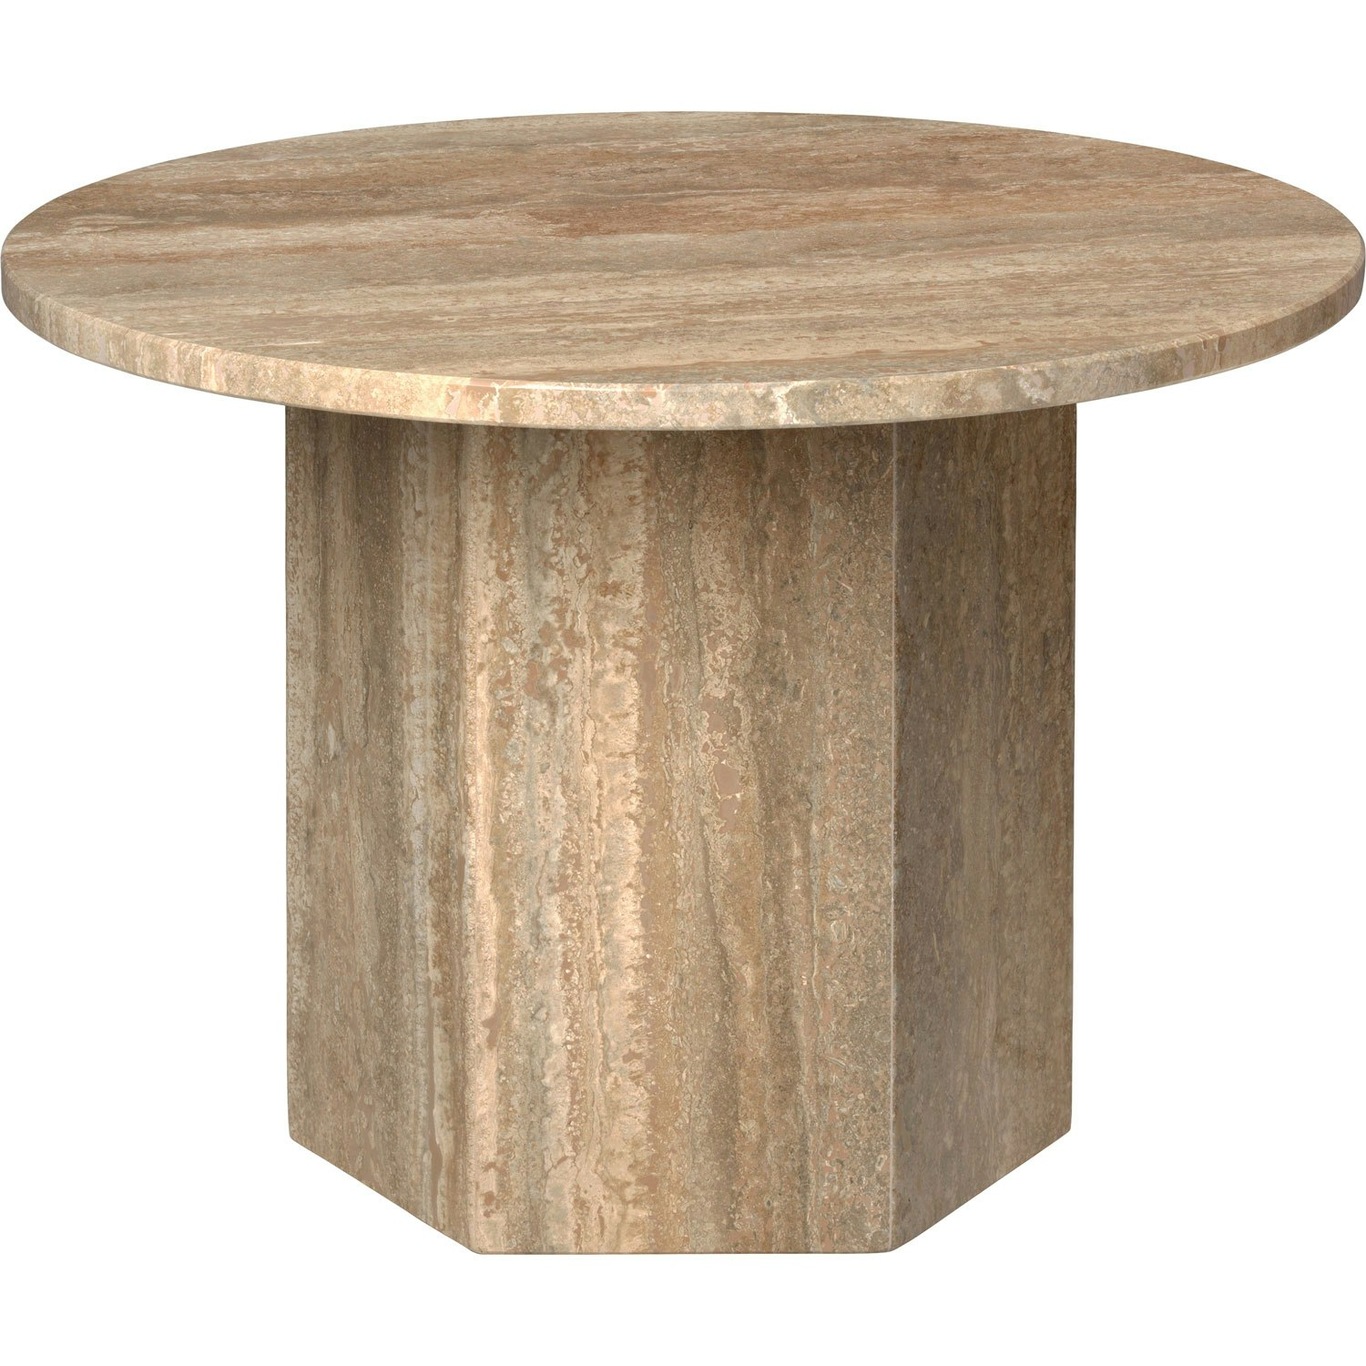 Epic Coffee Table Round 60 cm, Warm Taupe